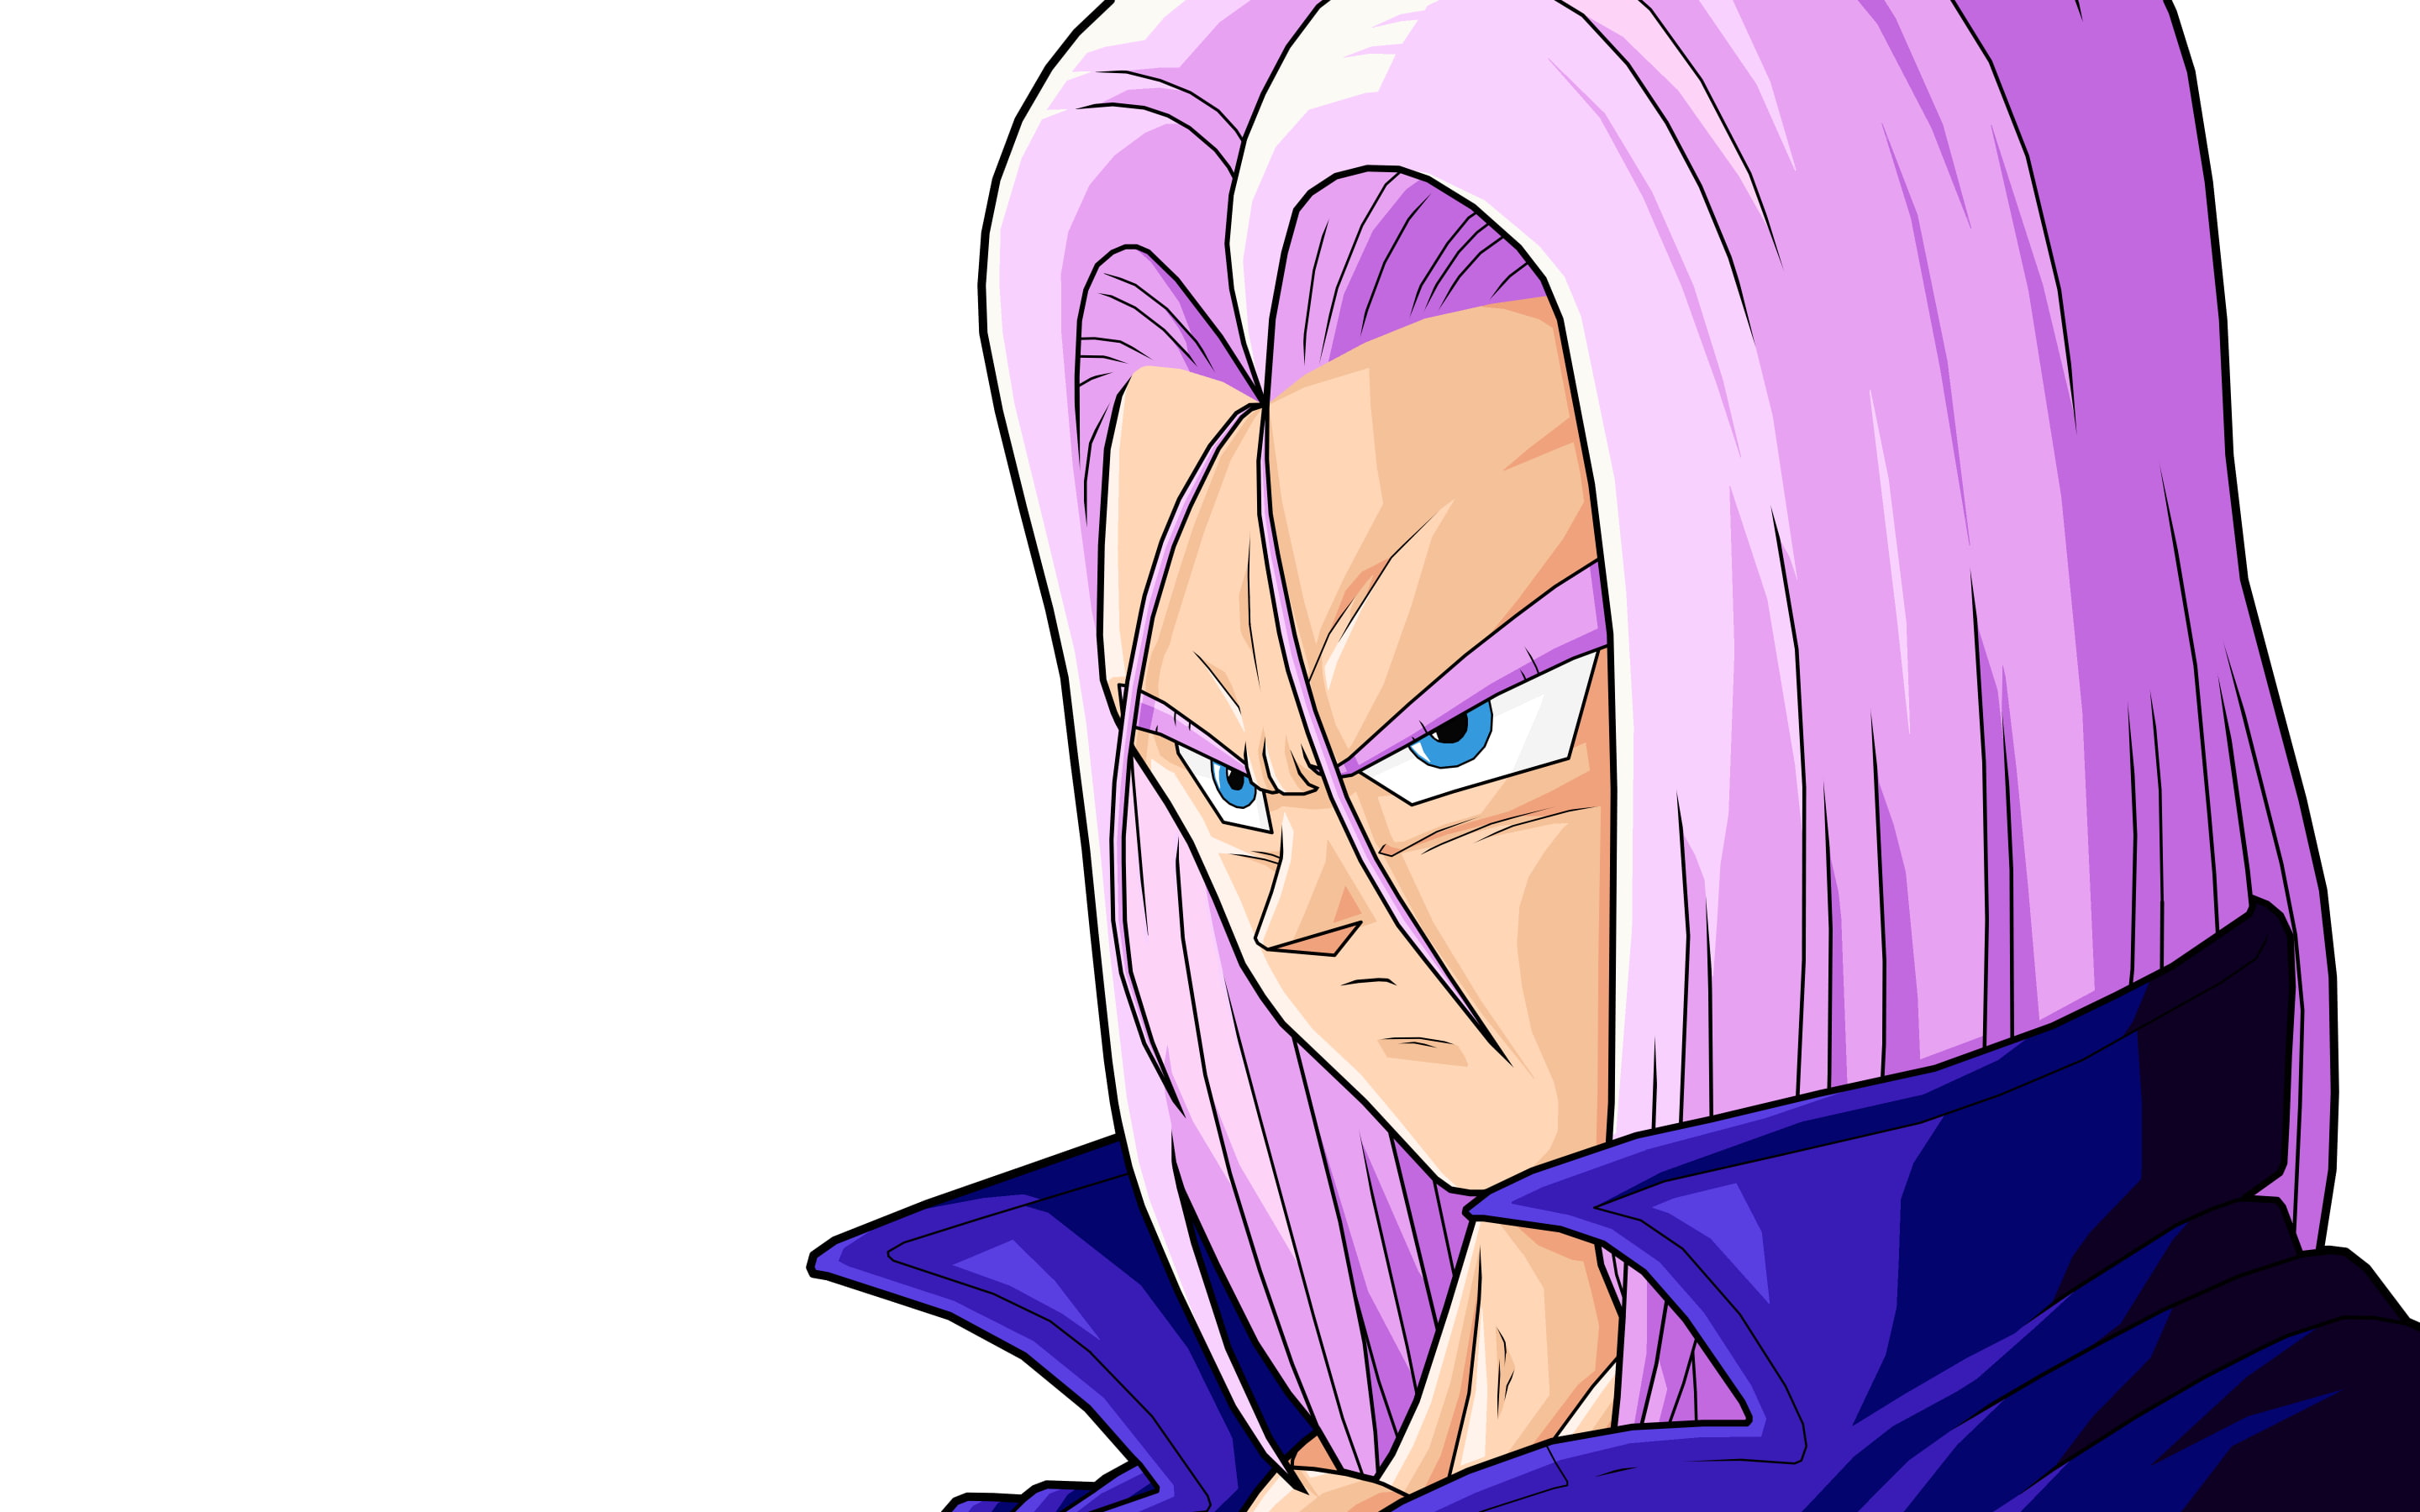 Dragon Ball, anime, Trunks (character), low angle view, multi colored